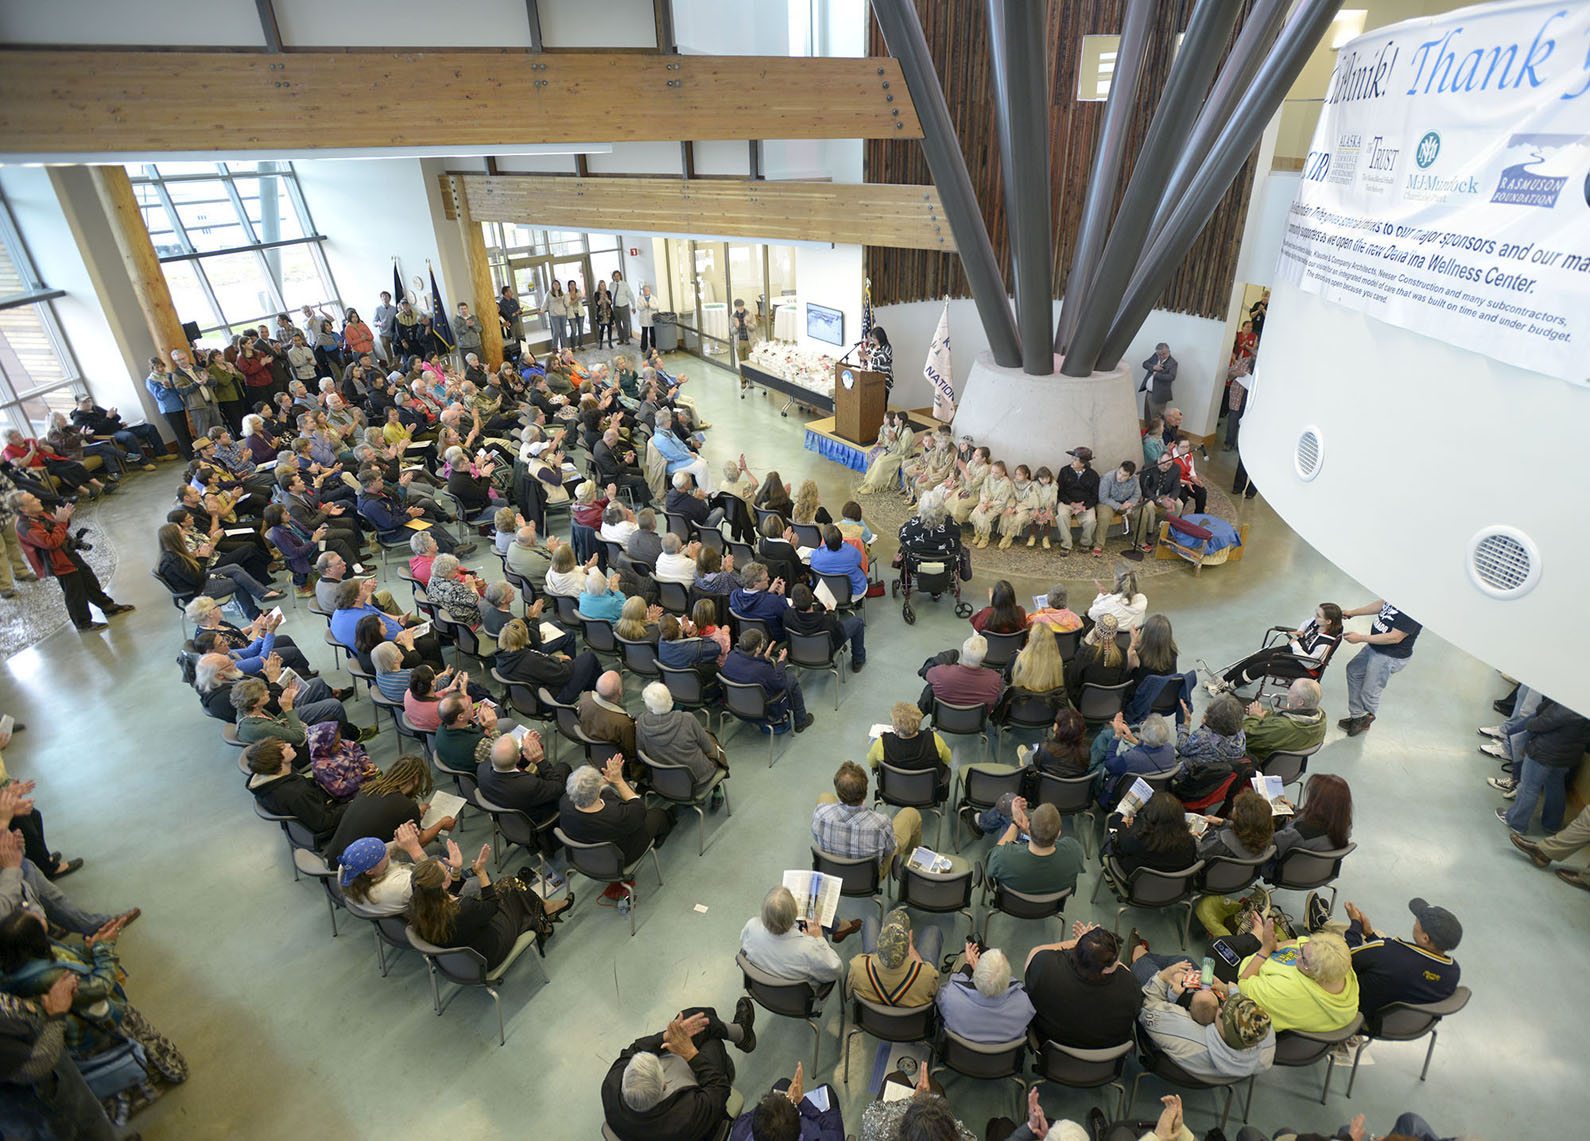 A standing-room-only crowd applauds June 12 as Kenaitze Indian Tribe Executive Director Jaylene Peterson-Nyren makes opening remarks during the first day of a three-day grand opening ceremony for the Dena’ina Wellness Center located in Old Town Kenai.-Photo by M. Scott Moon, Kenaitze Indian Tribe